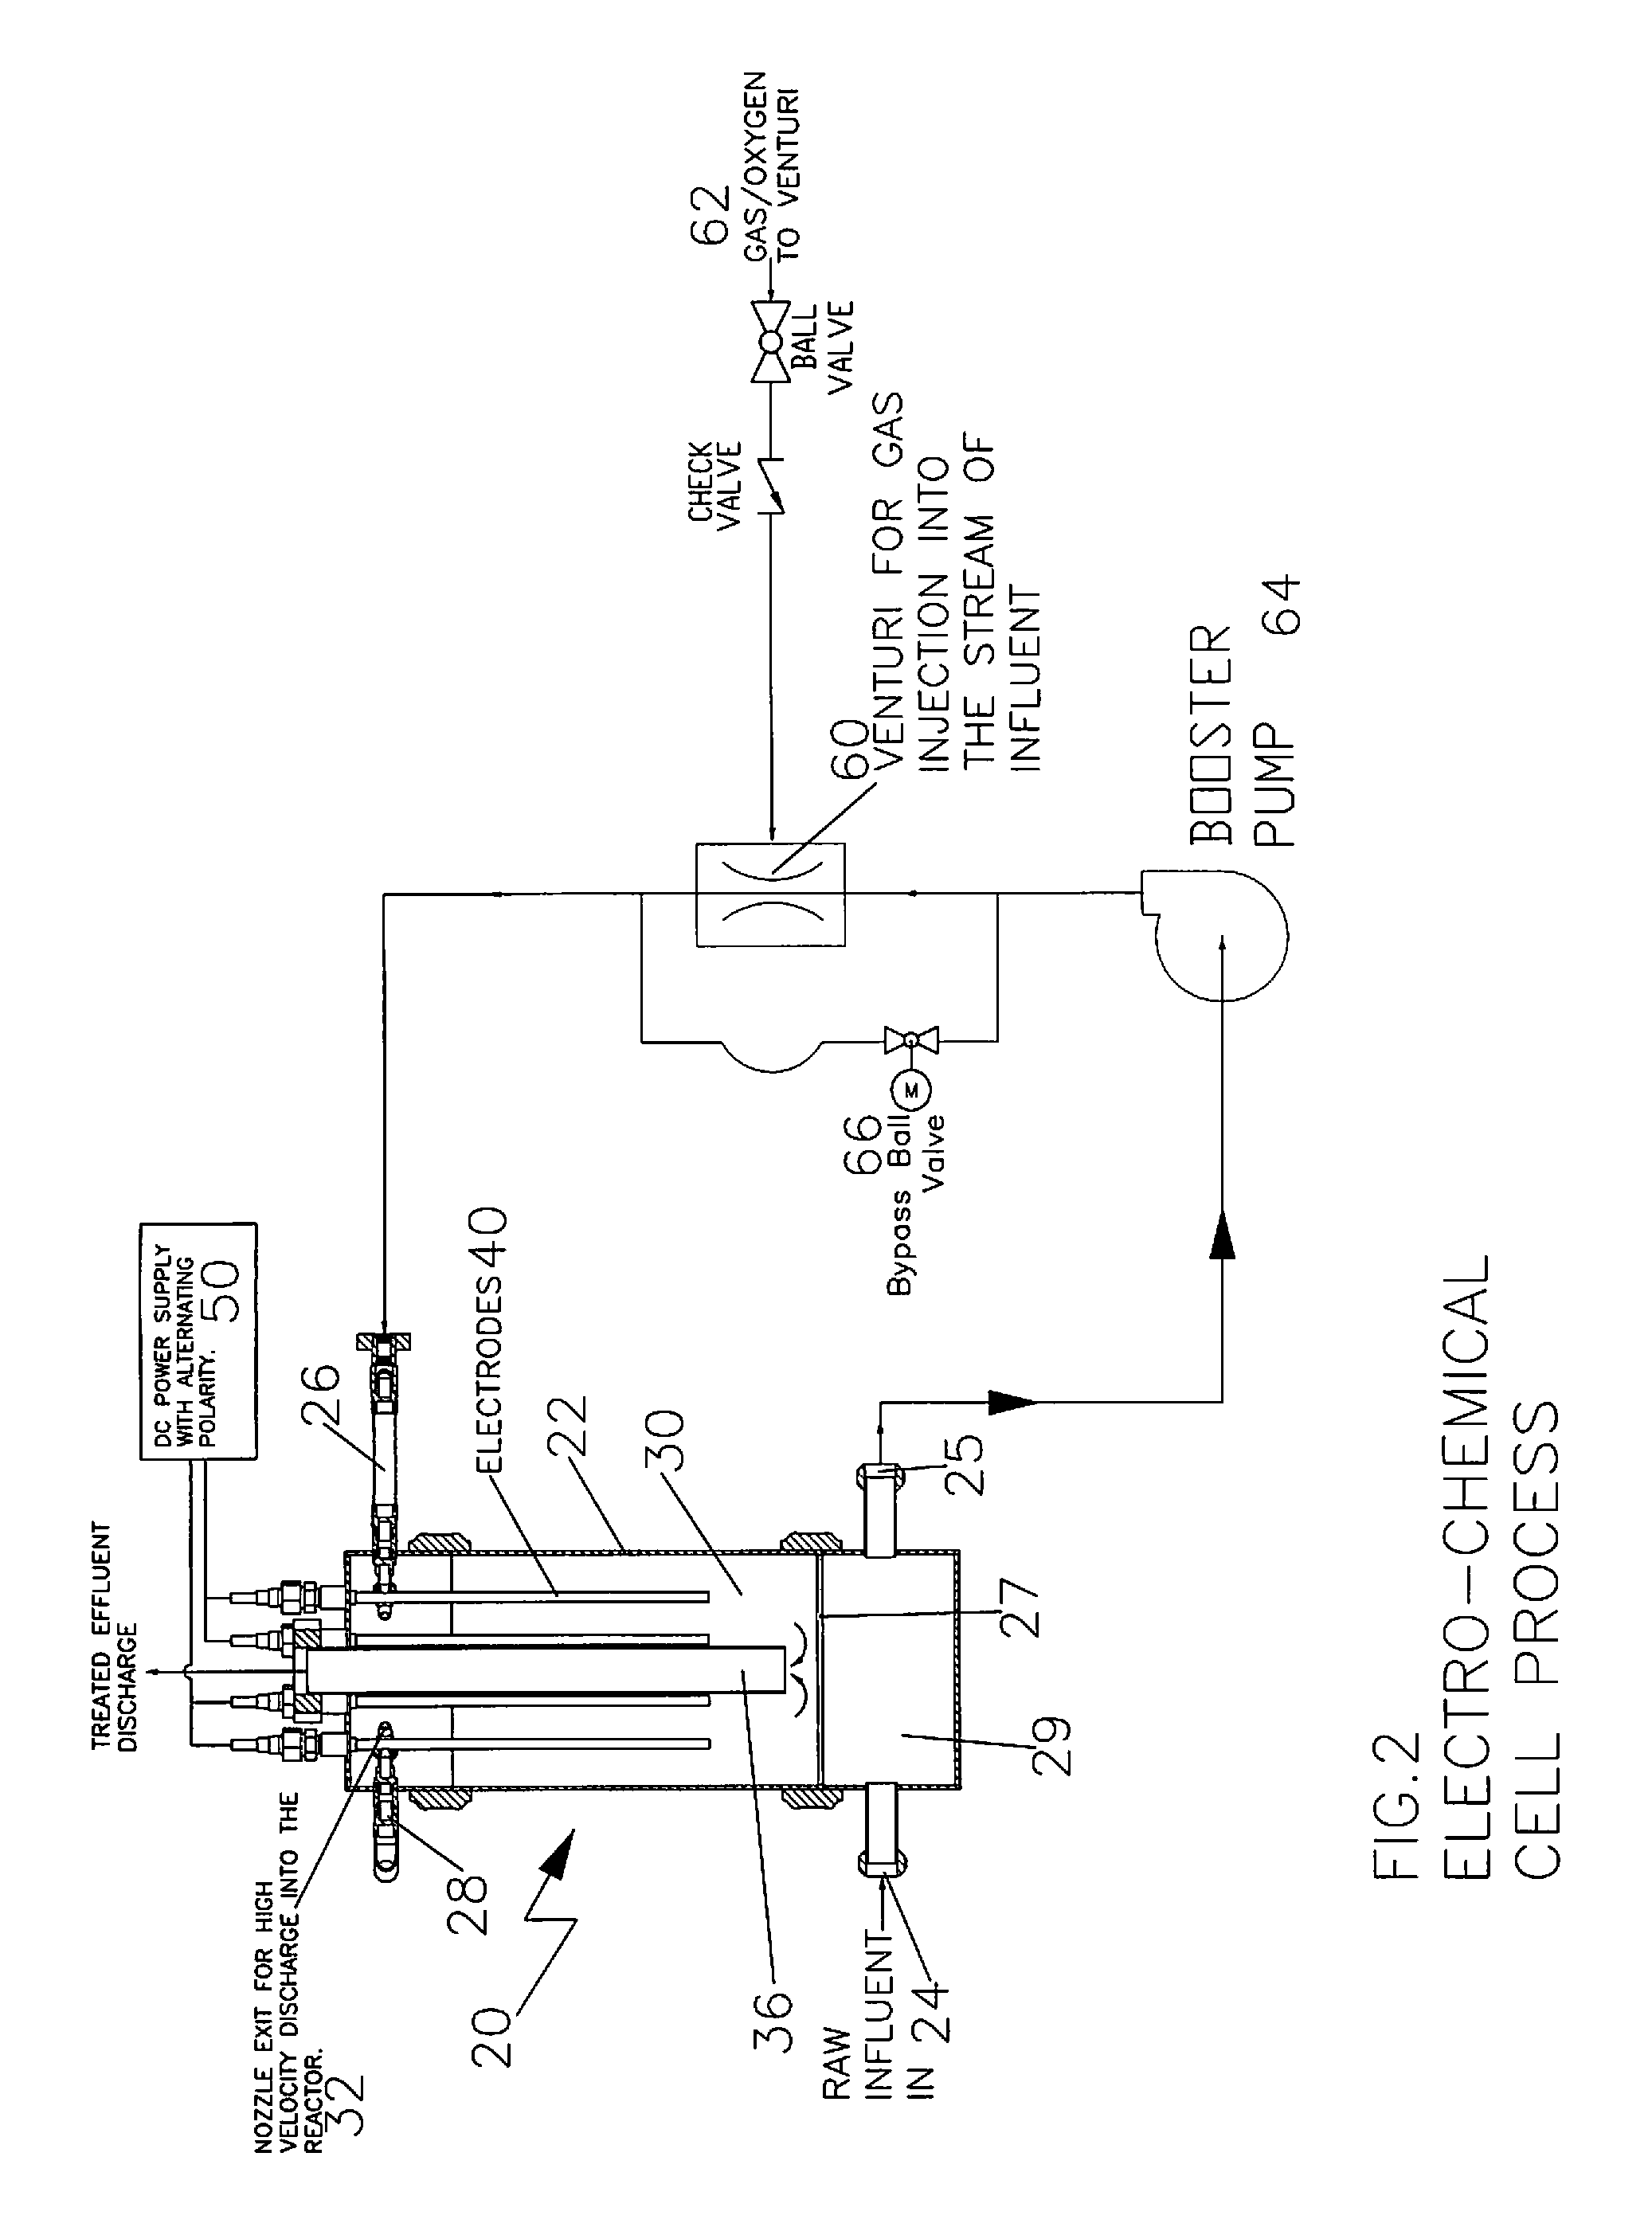 Electrolytic cell with advanced oxidation process and electro catalytic paddle electrode